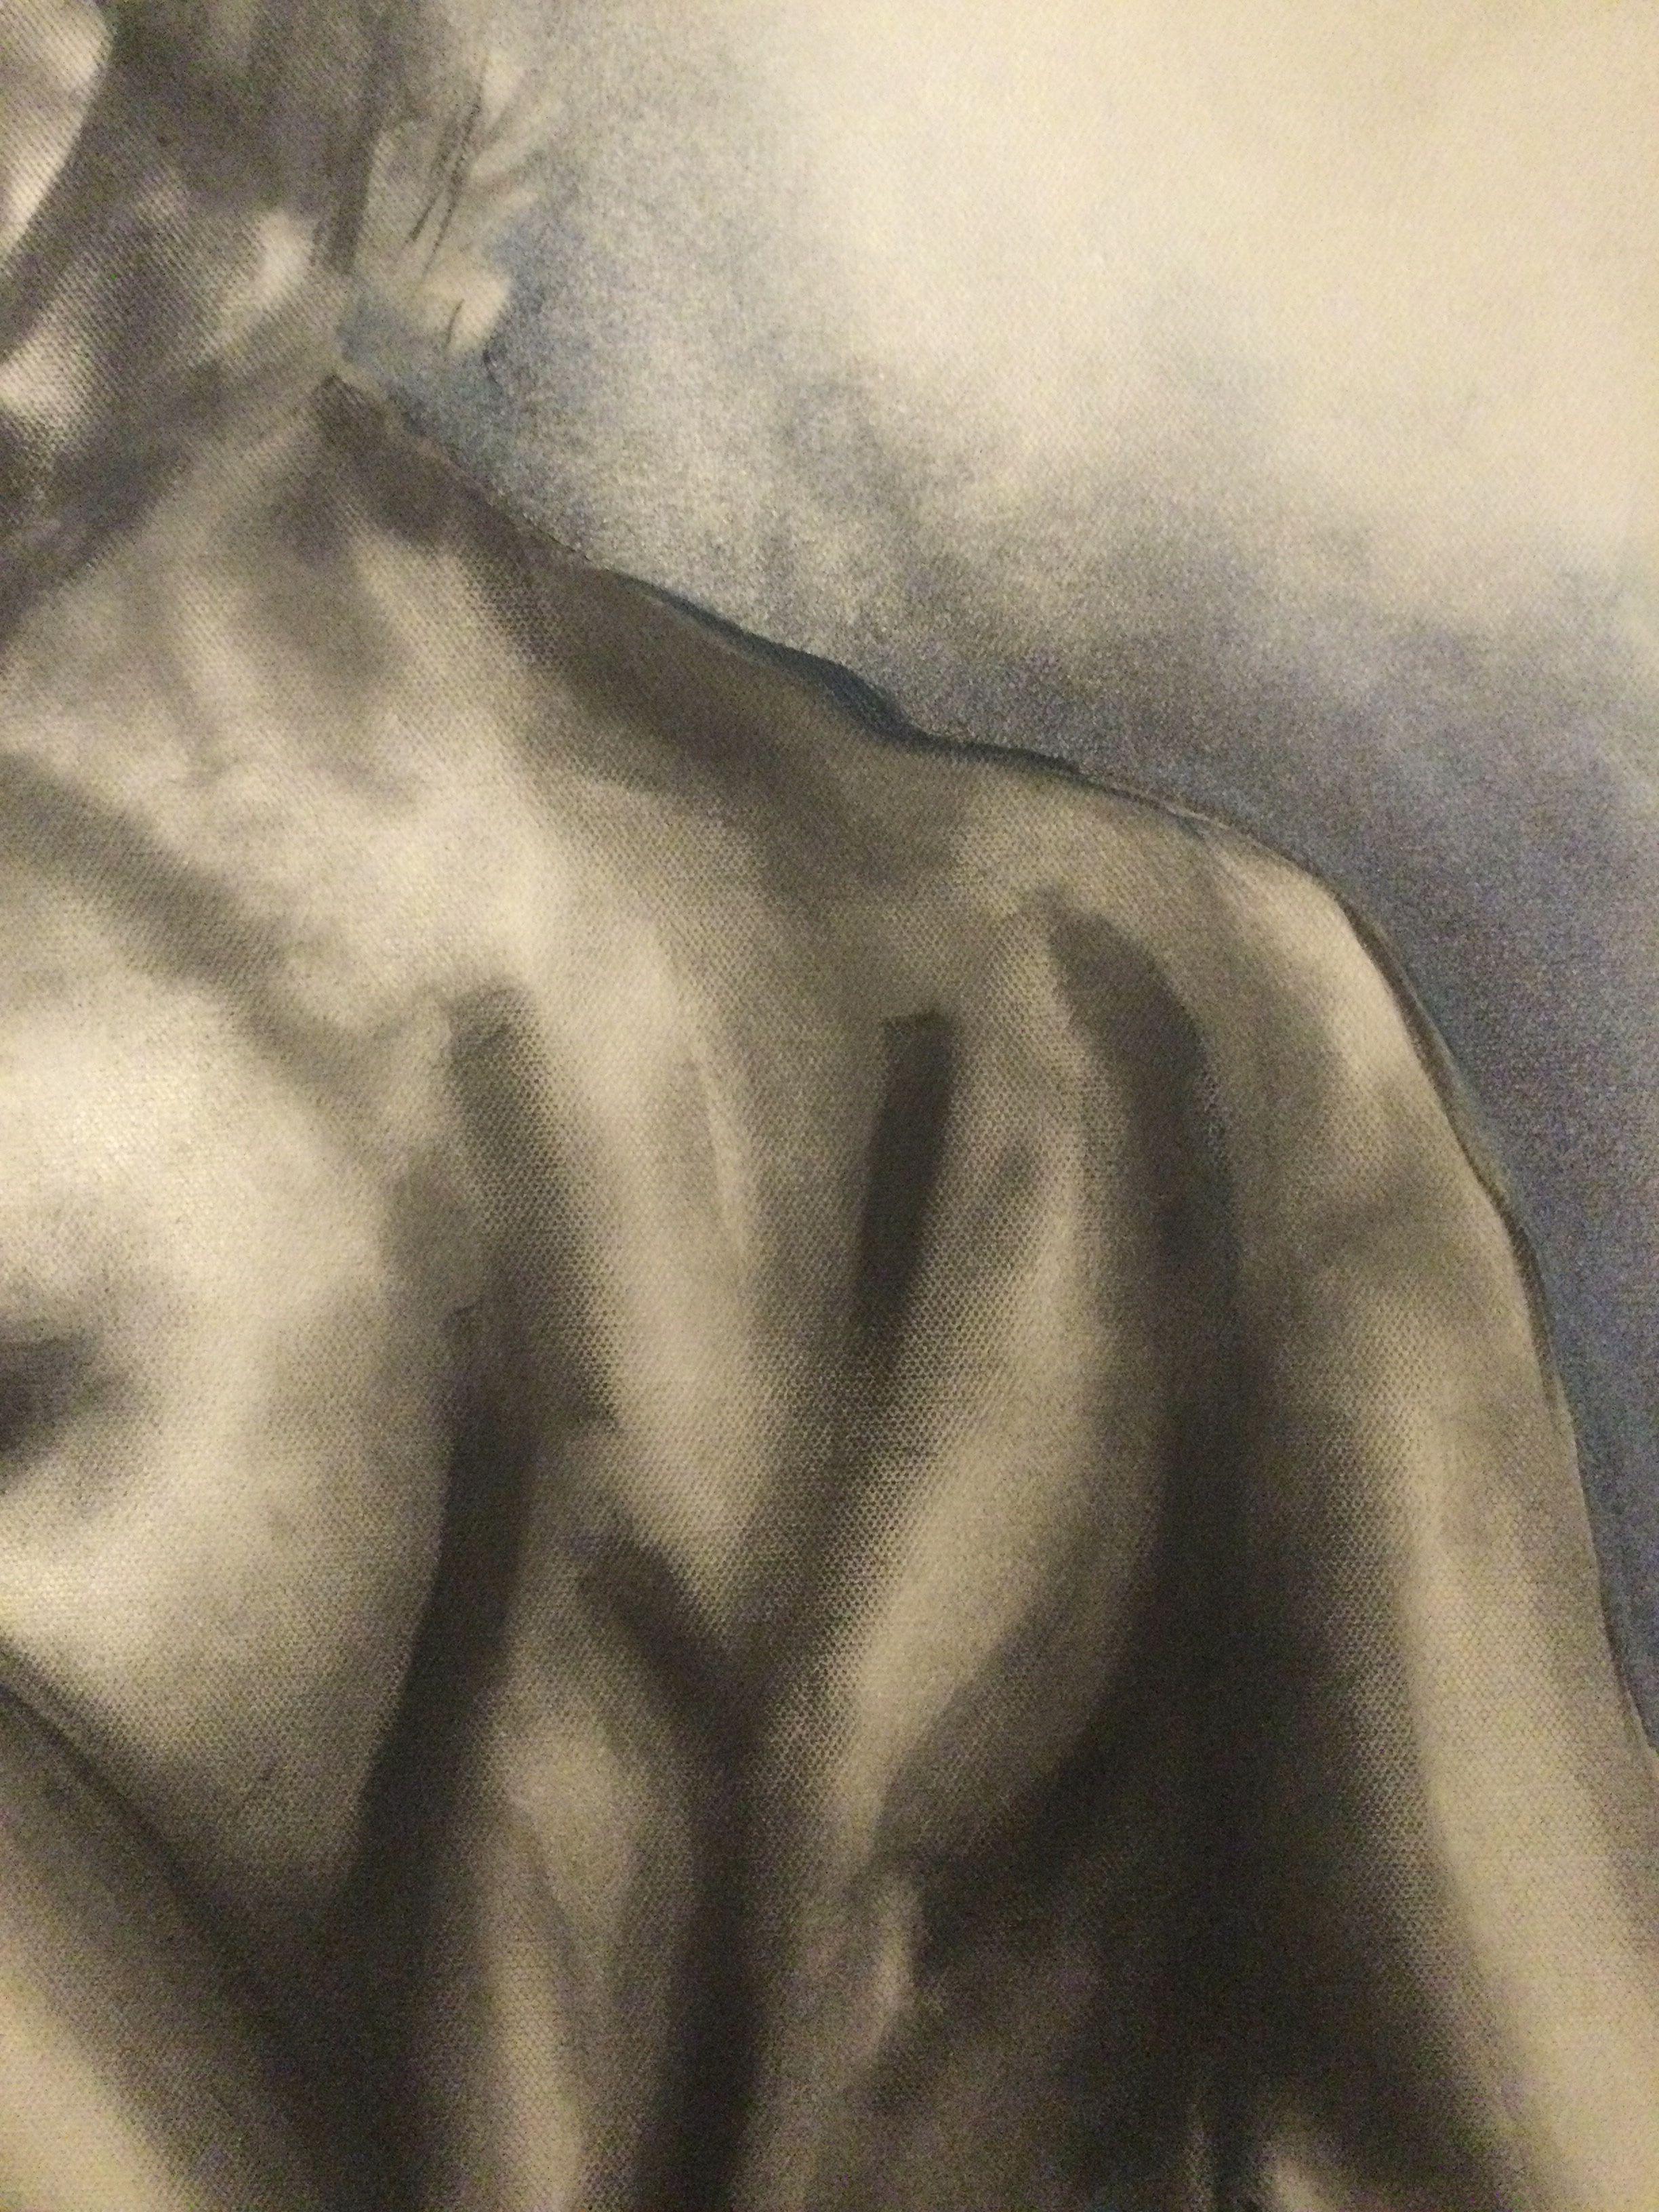 charcoal drawing on canvas